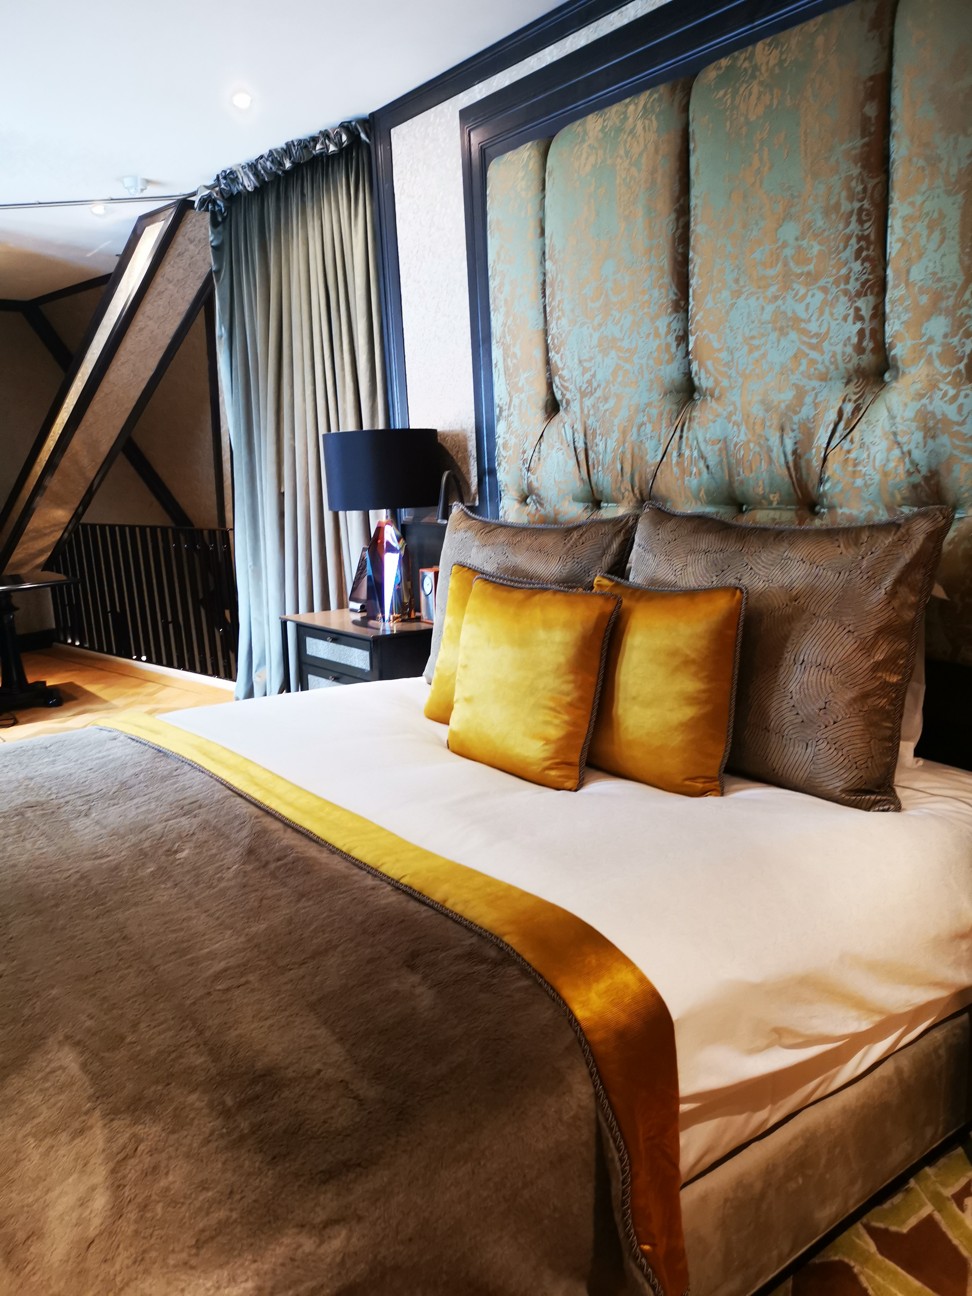 The master bedroom of the Rooftop Loft suite at Amsterdam’s Hotel TwentySeven.